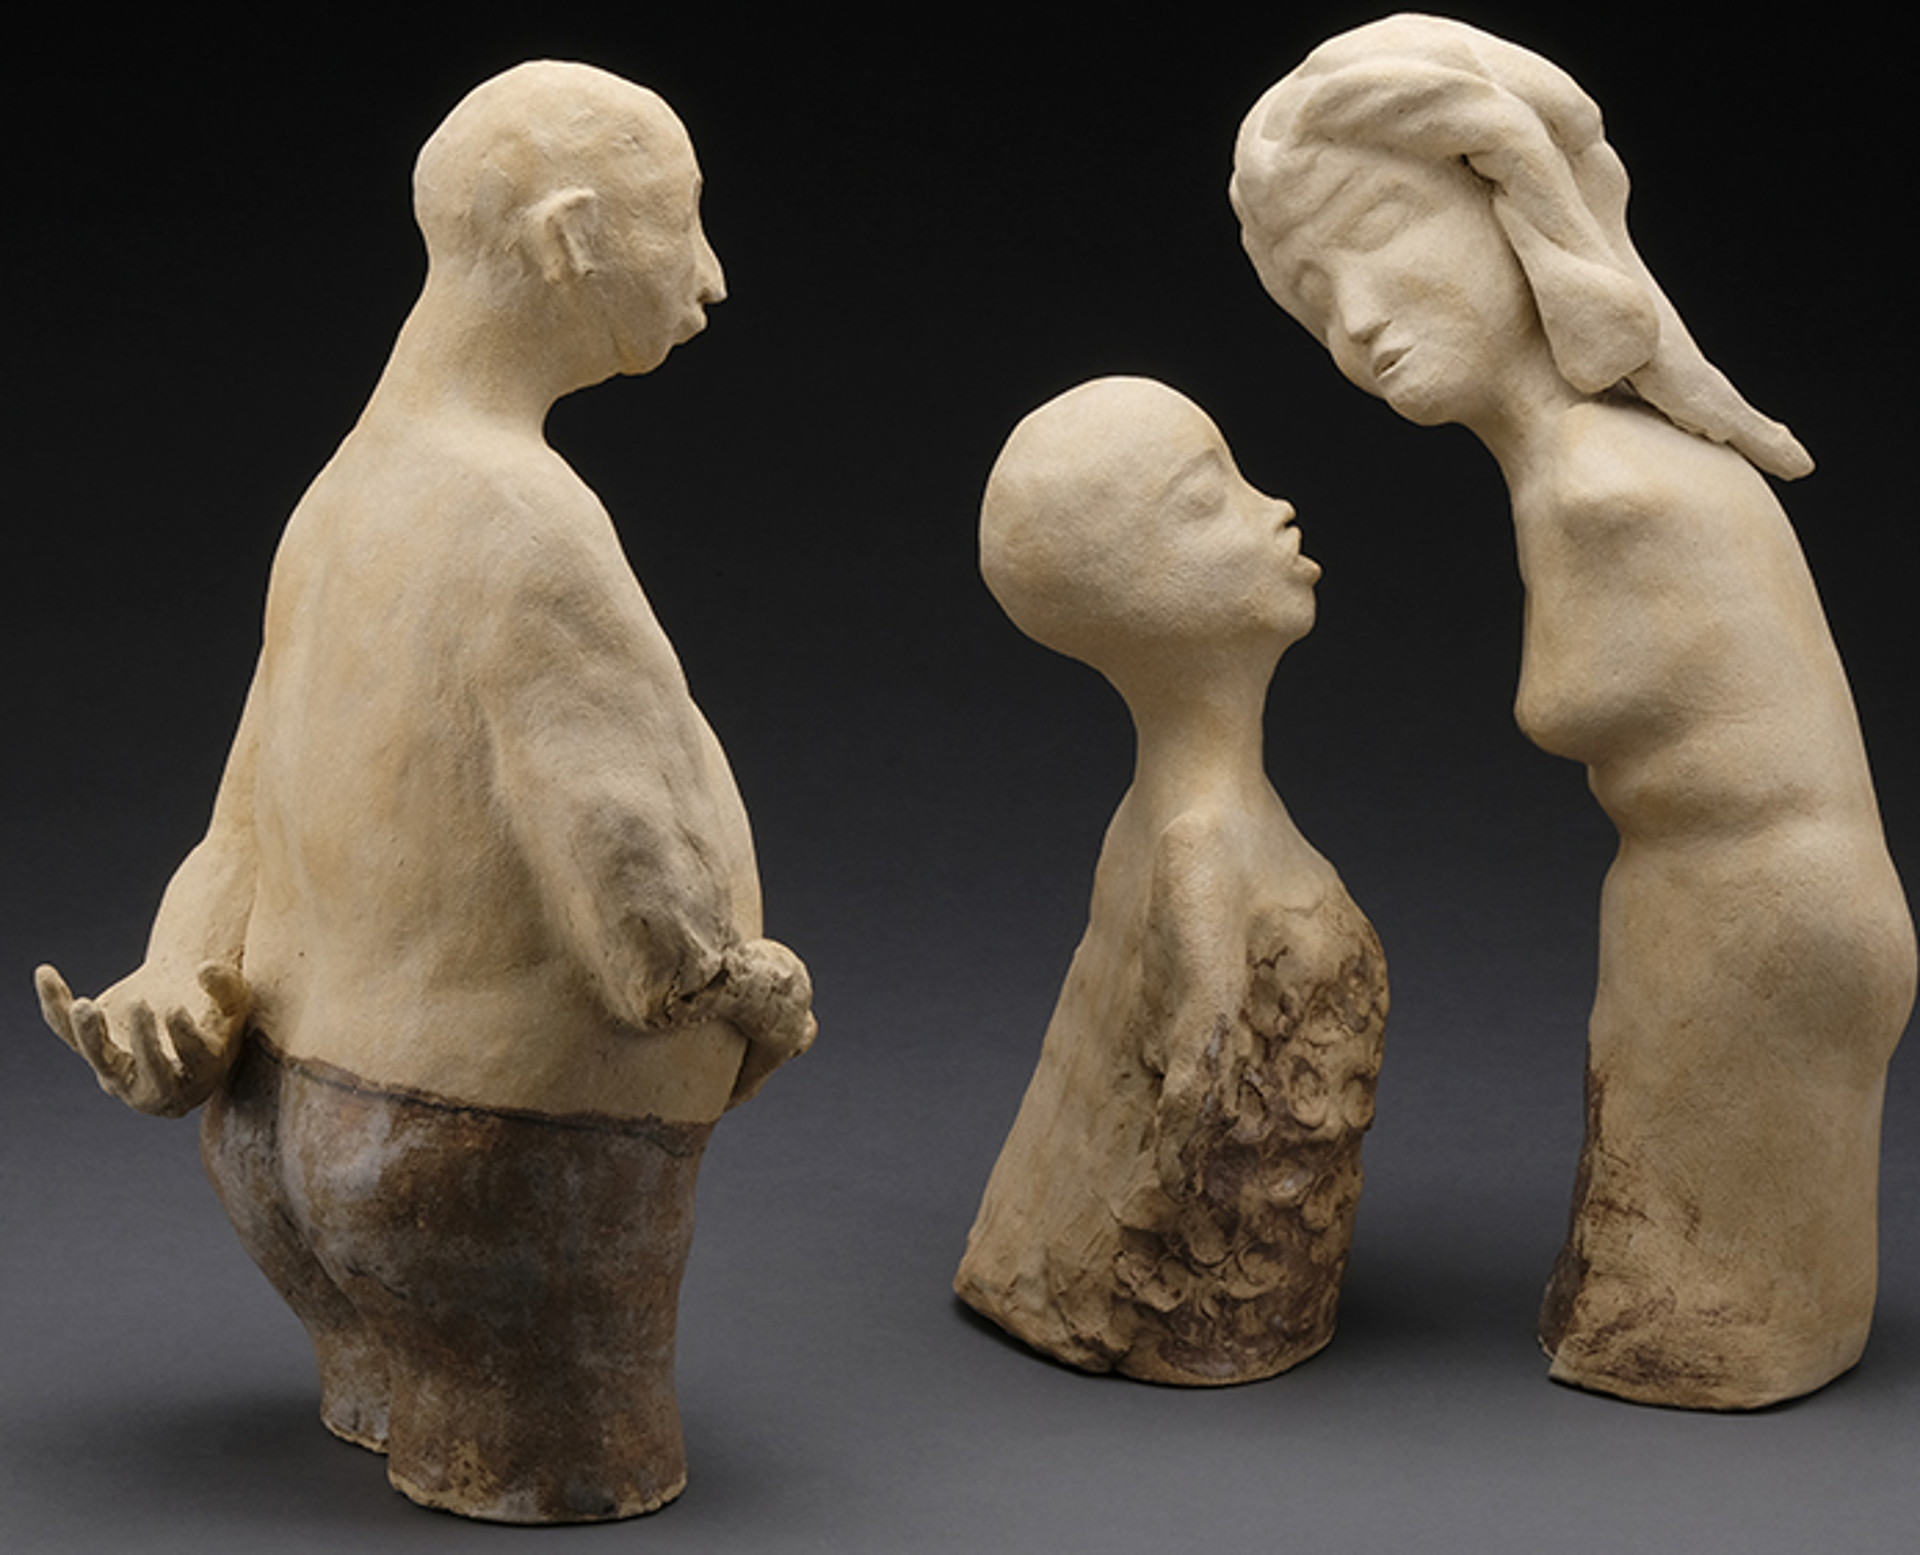 Whispered Conversations (3 Figures) by Linda Kelly Cherney